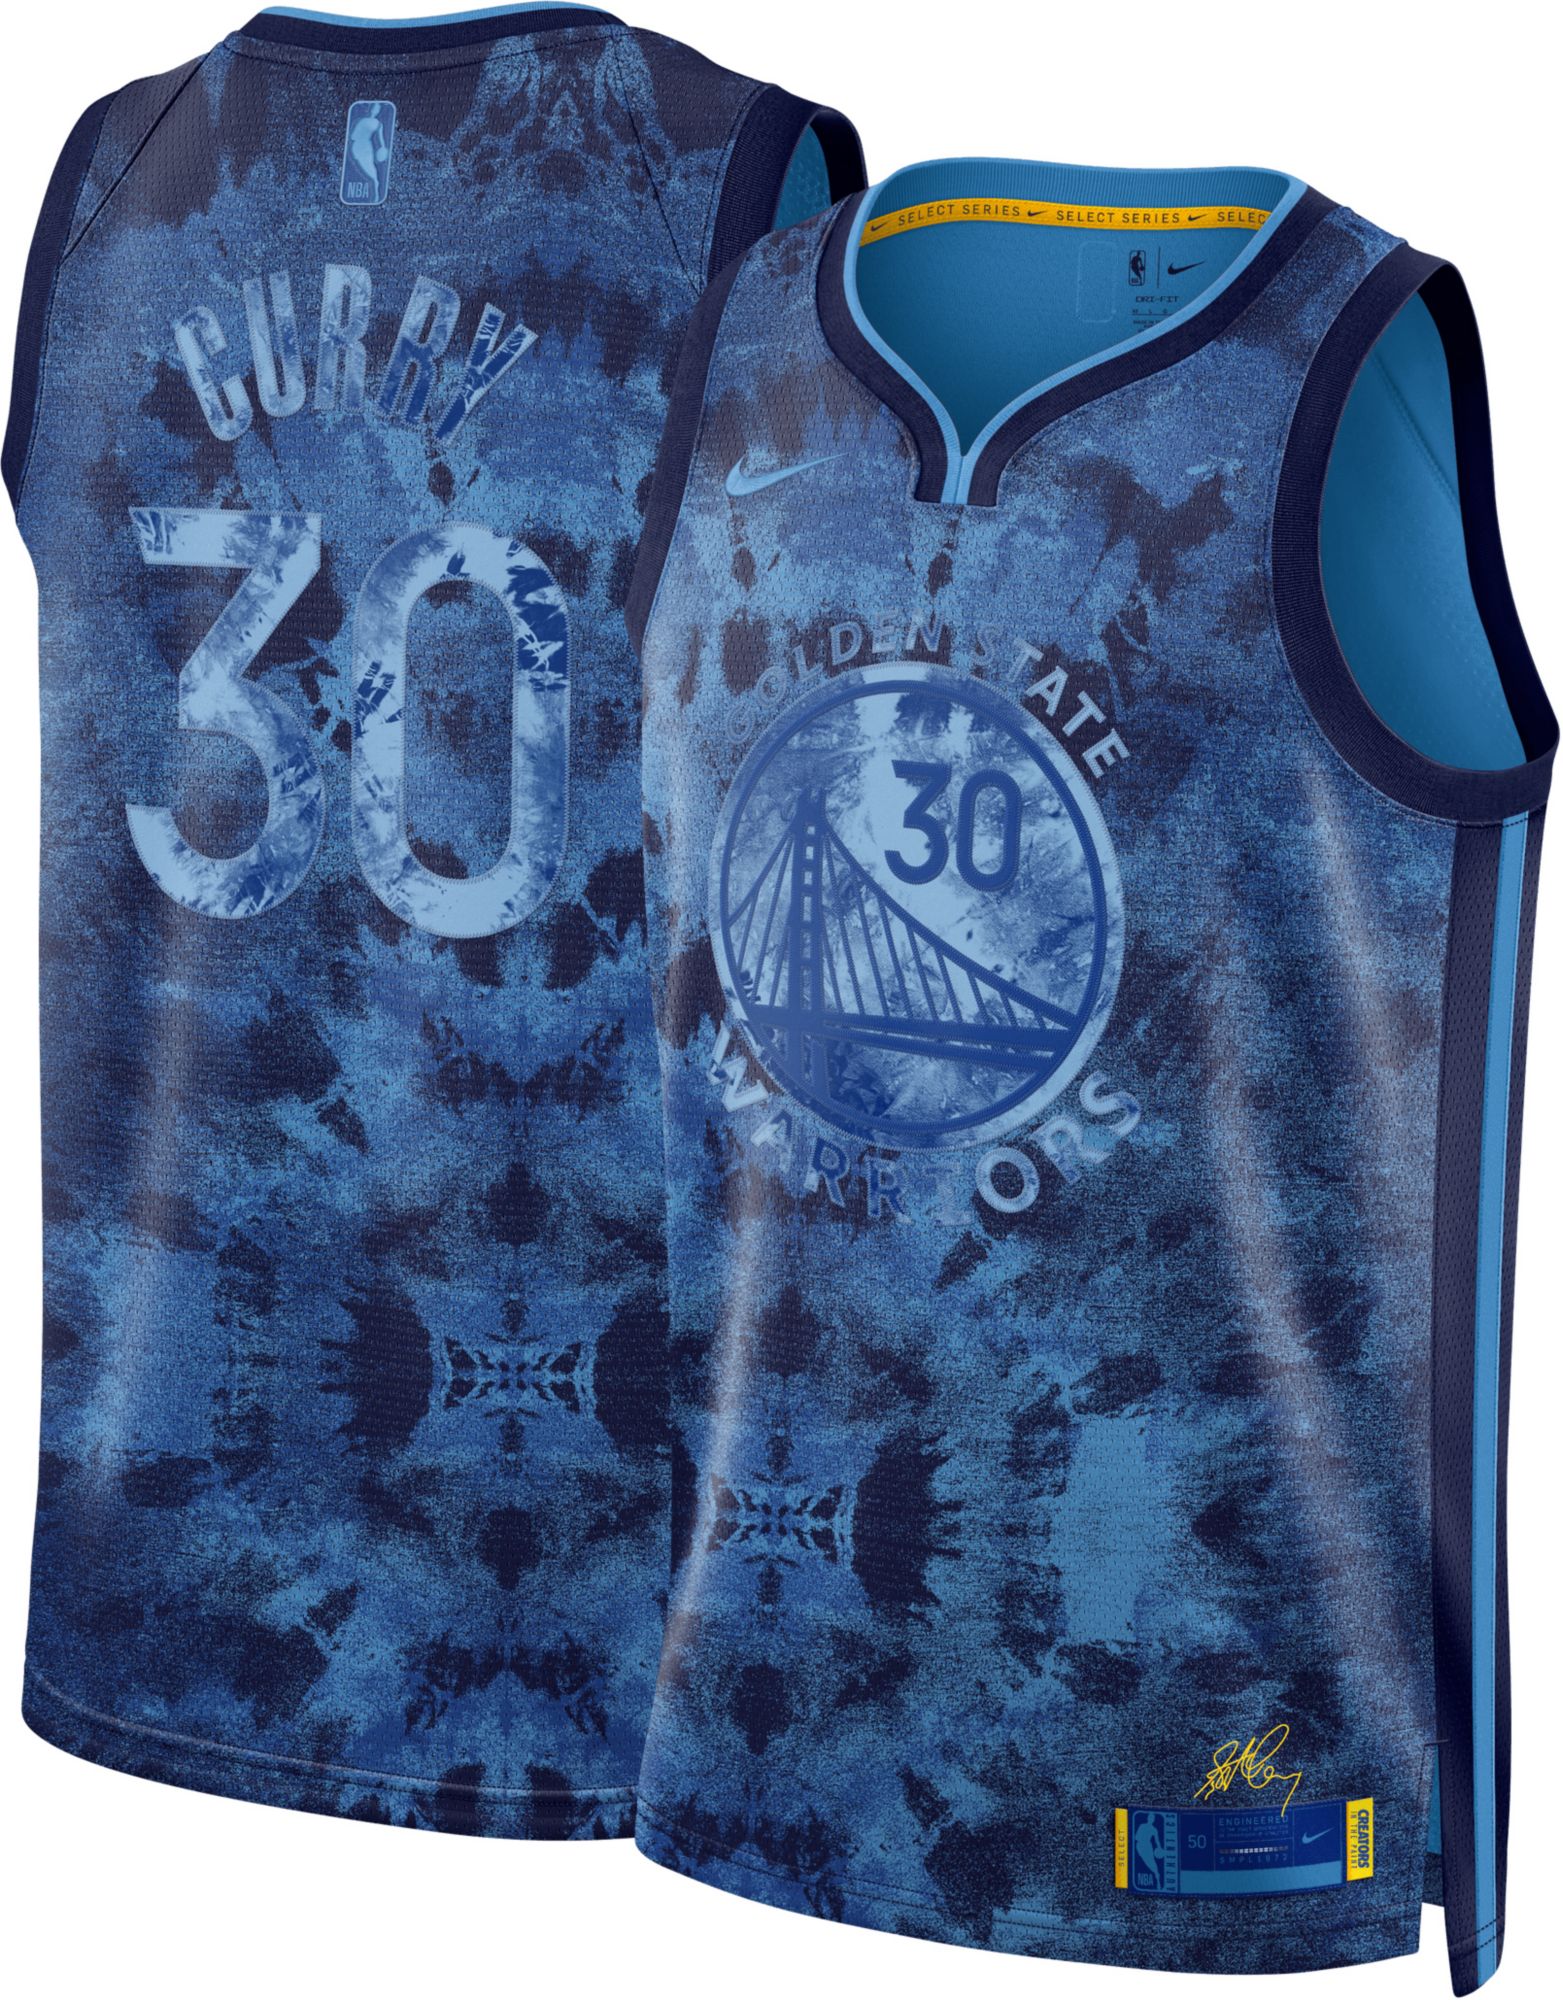 stephen curry jersey infant